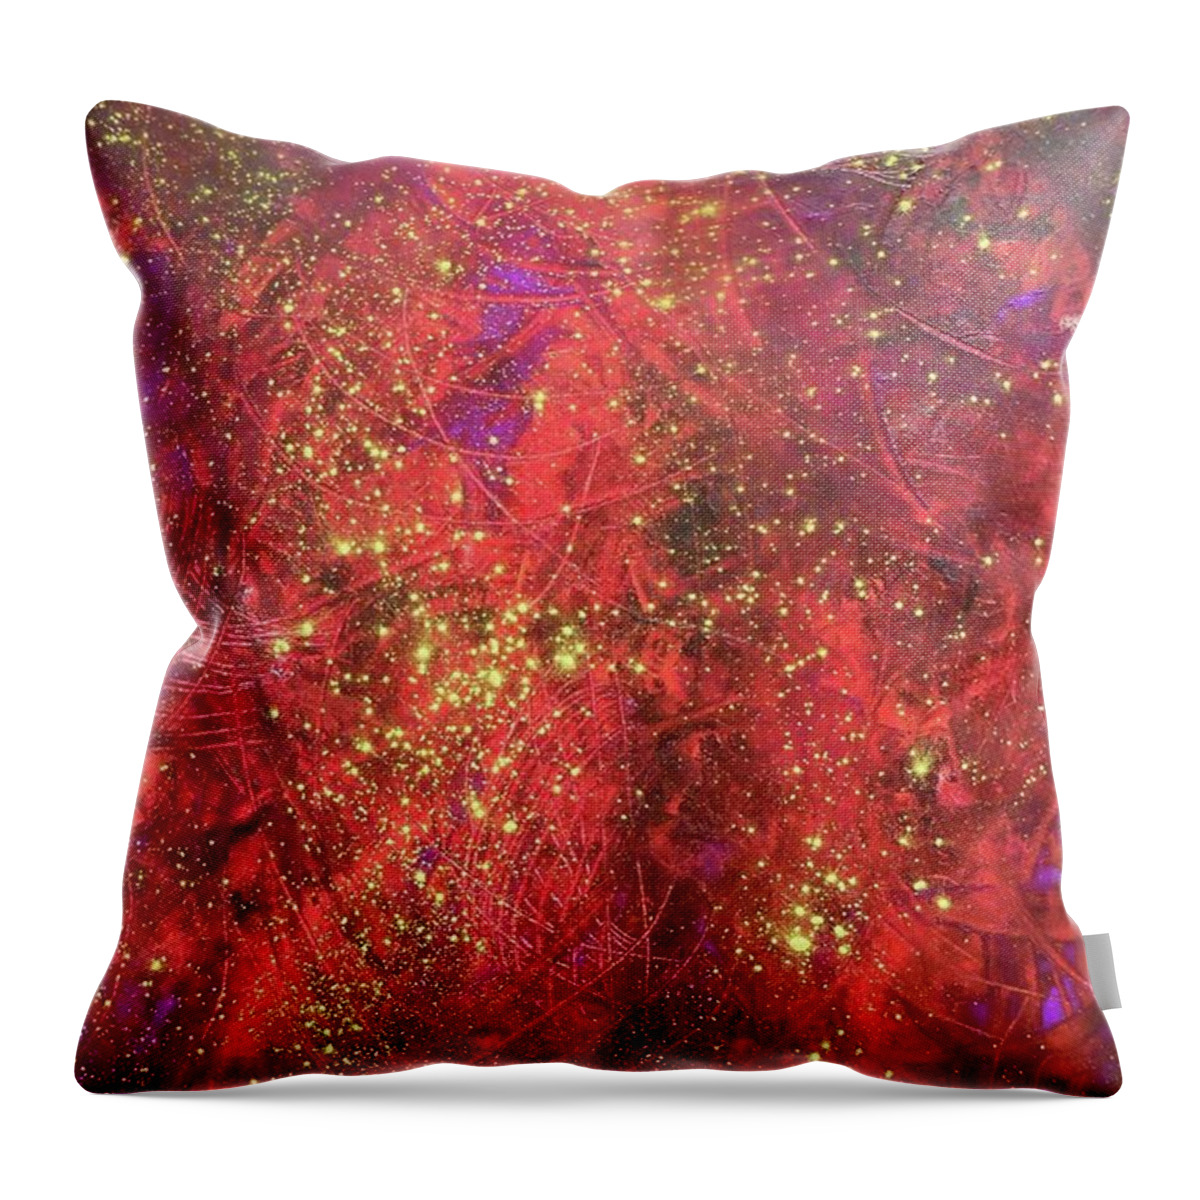 Abstract Throw Pillow featuring the painting Cosmos by Karen Lillard